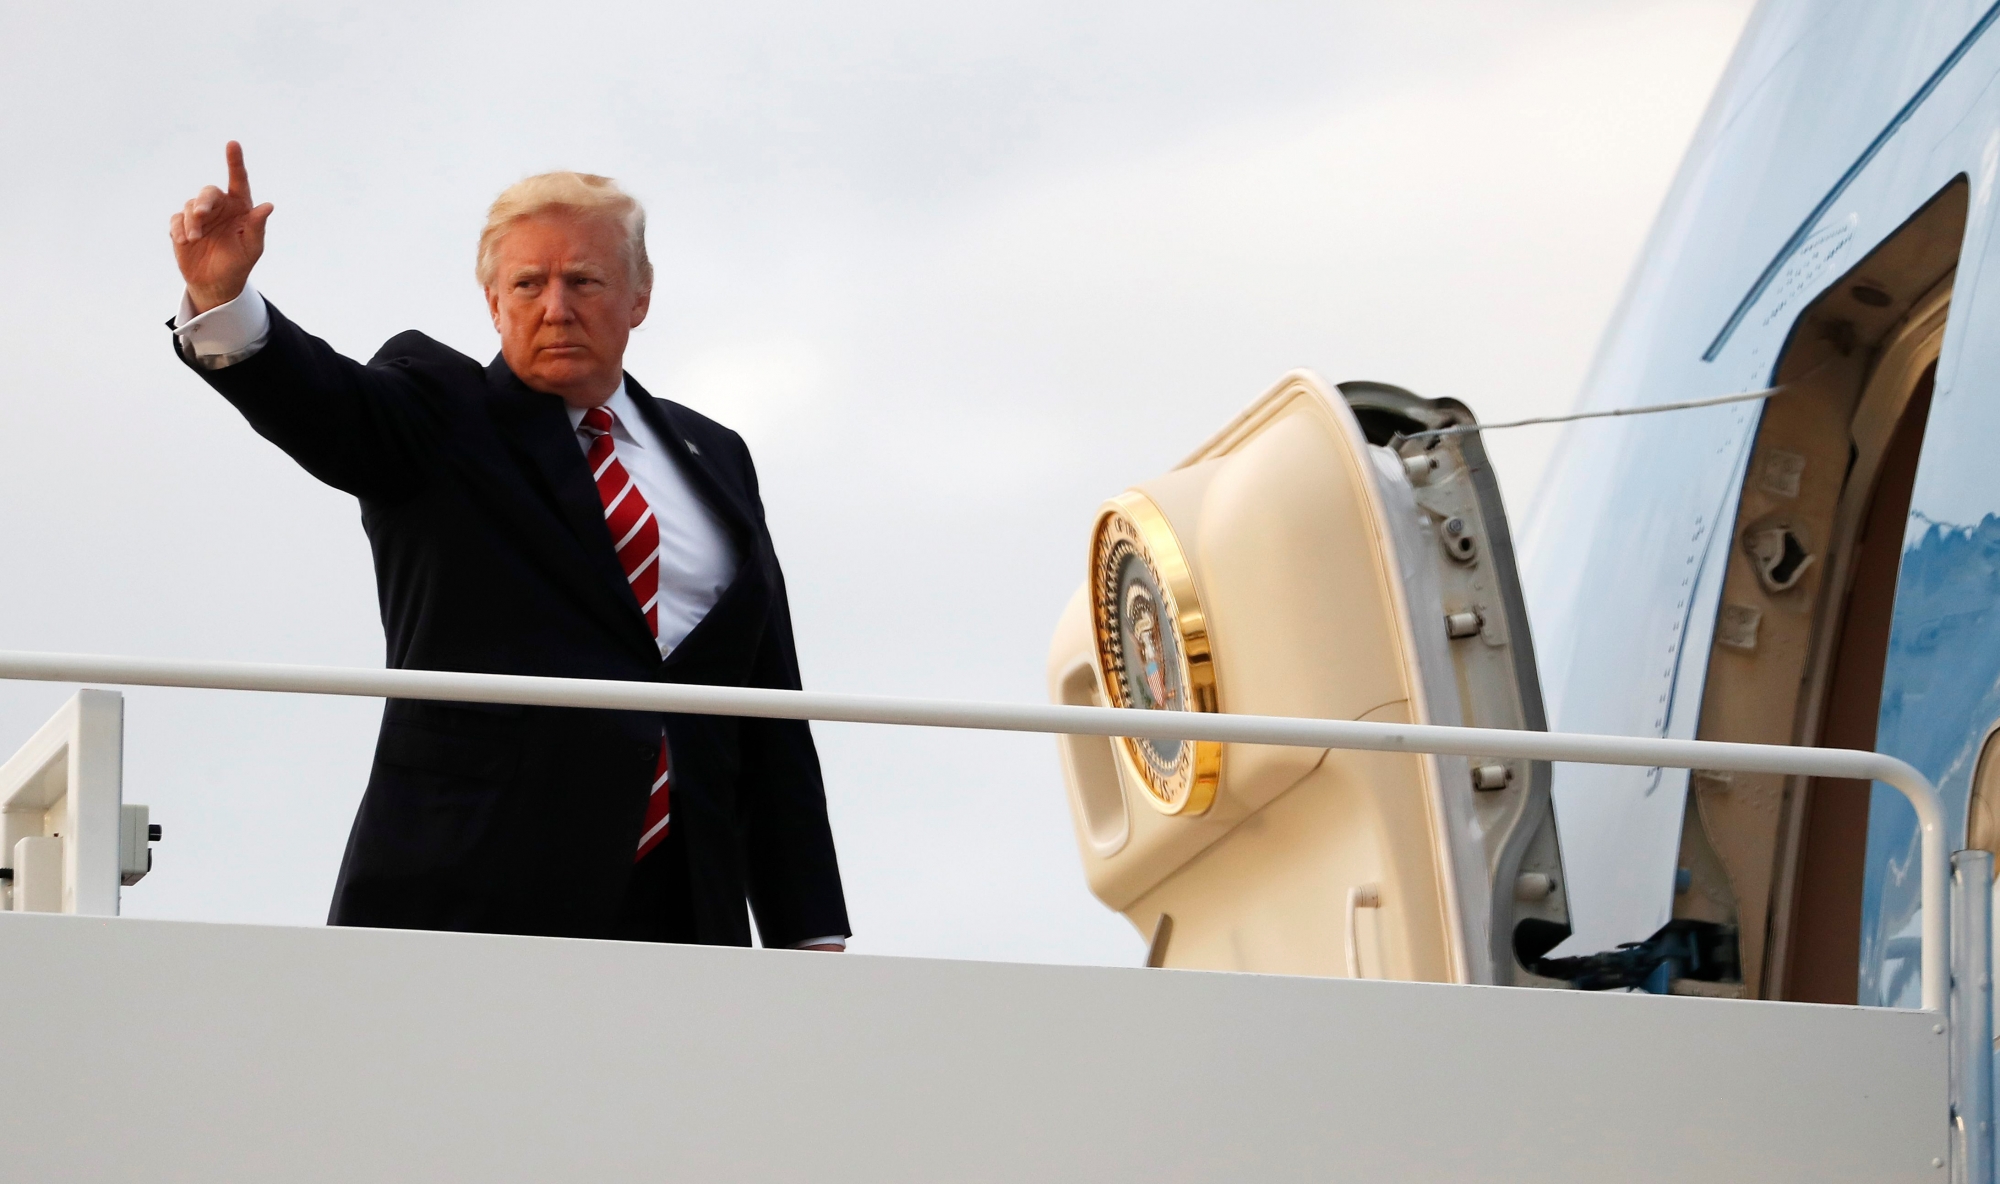 President Donald Trump boards Air Force One, Saturday, Oct. 7, 2017, at Andrews Air Force Base, Md., en route to a fundraiser in Greensboro, N.C.. (AP Photo/Carolyn Kaster) Trump